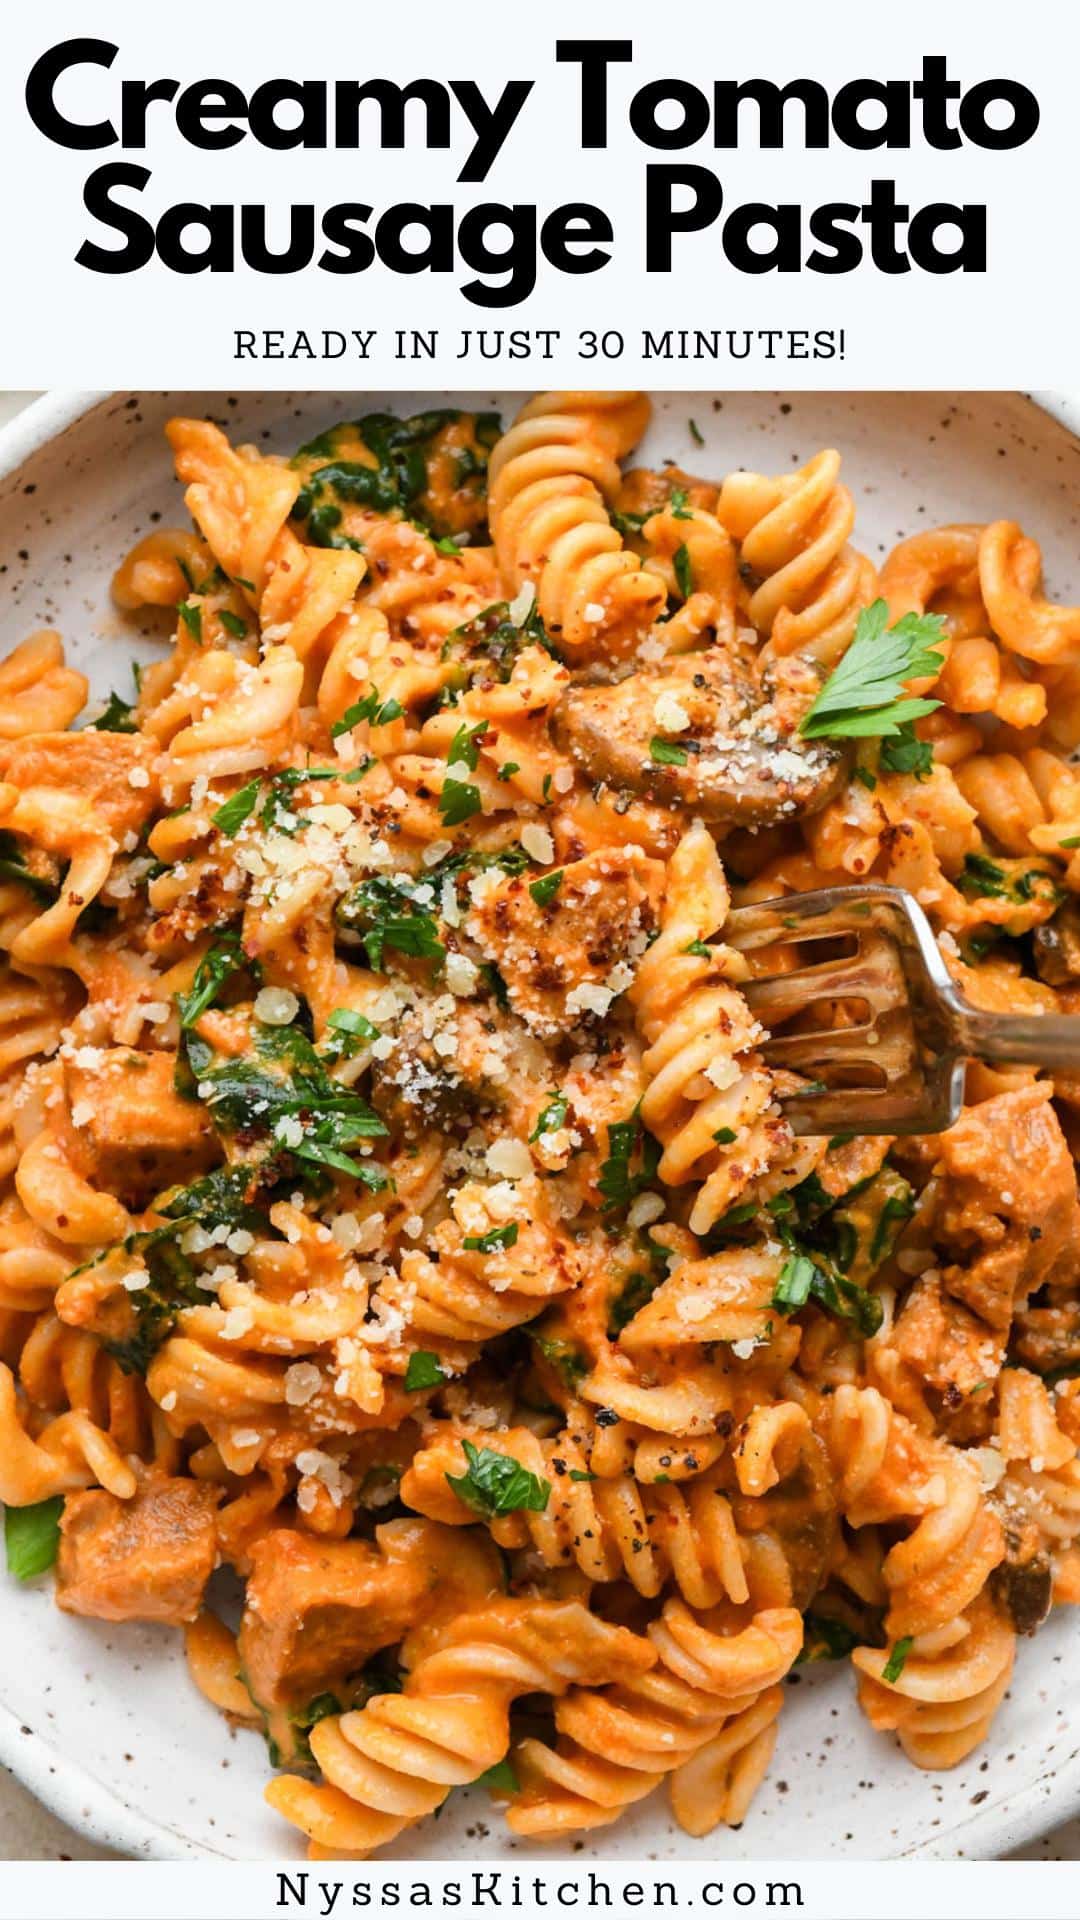 This tomato sausage pasta recipe is the perfect example of healthy comfort food in a bowl! Made with your favorite pre-cooked sausage, nutrient-packed kale, savory mushrooms, and a creamy tomato sauce for a delicious meal that still feels indulgent. Perfect for family dinner or date night! Dairy free, gluten free, vegan option.